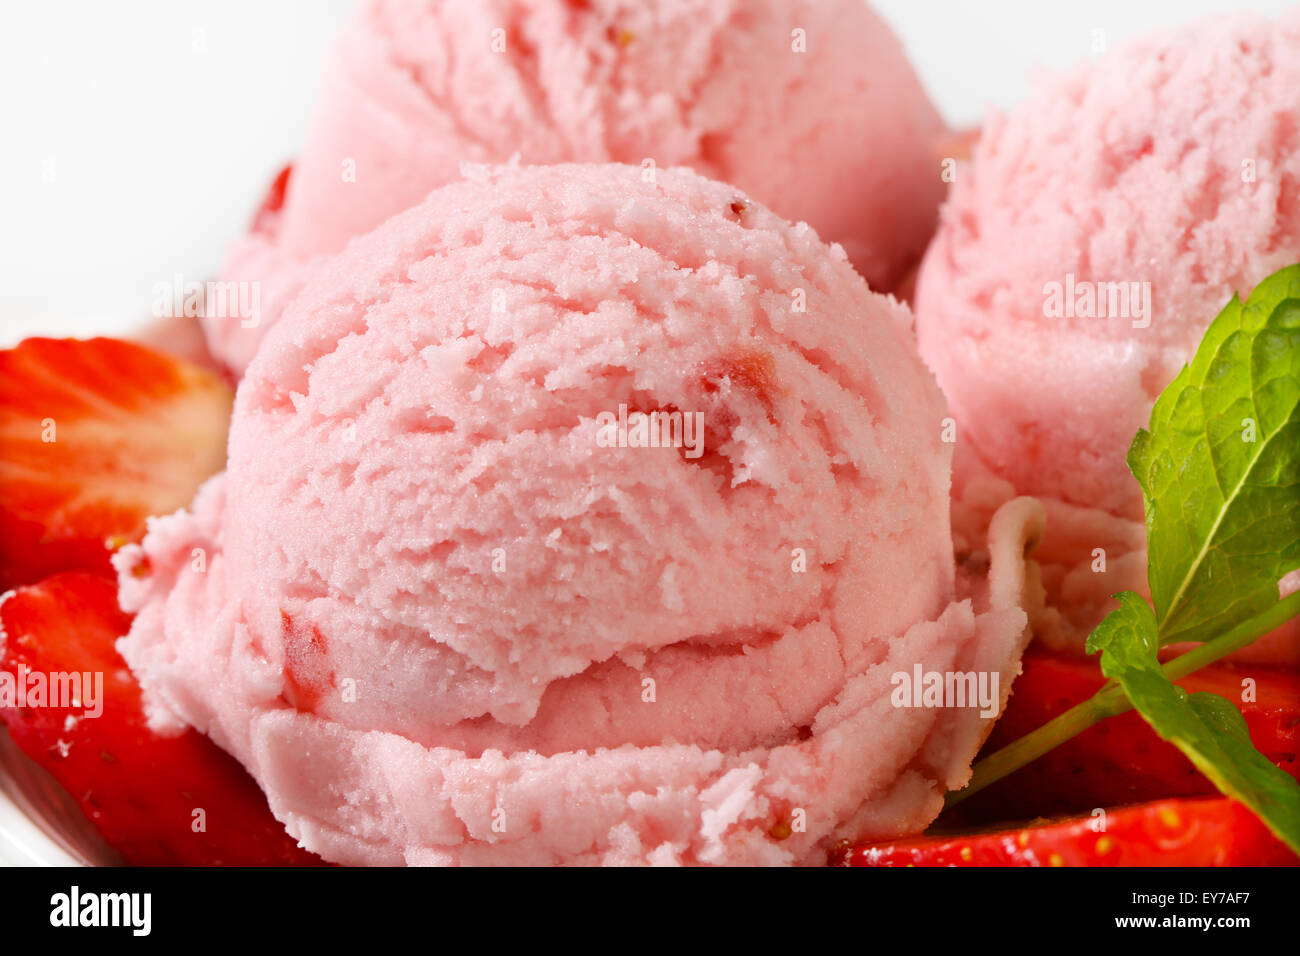 Scoops of strawberry sherbet with fresh fruit Stock Photo